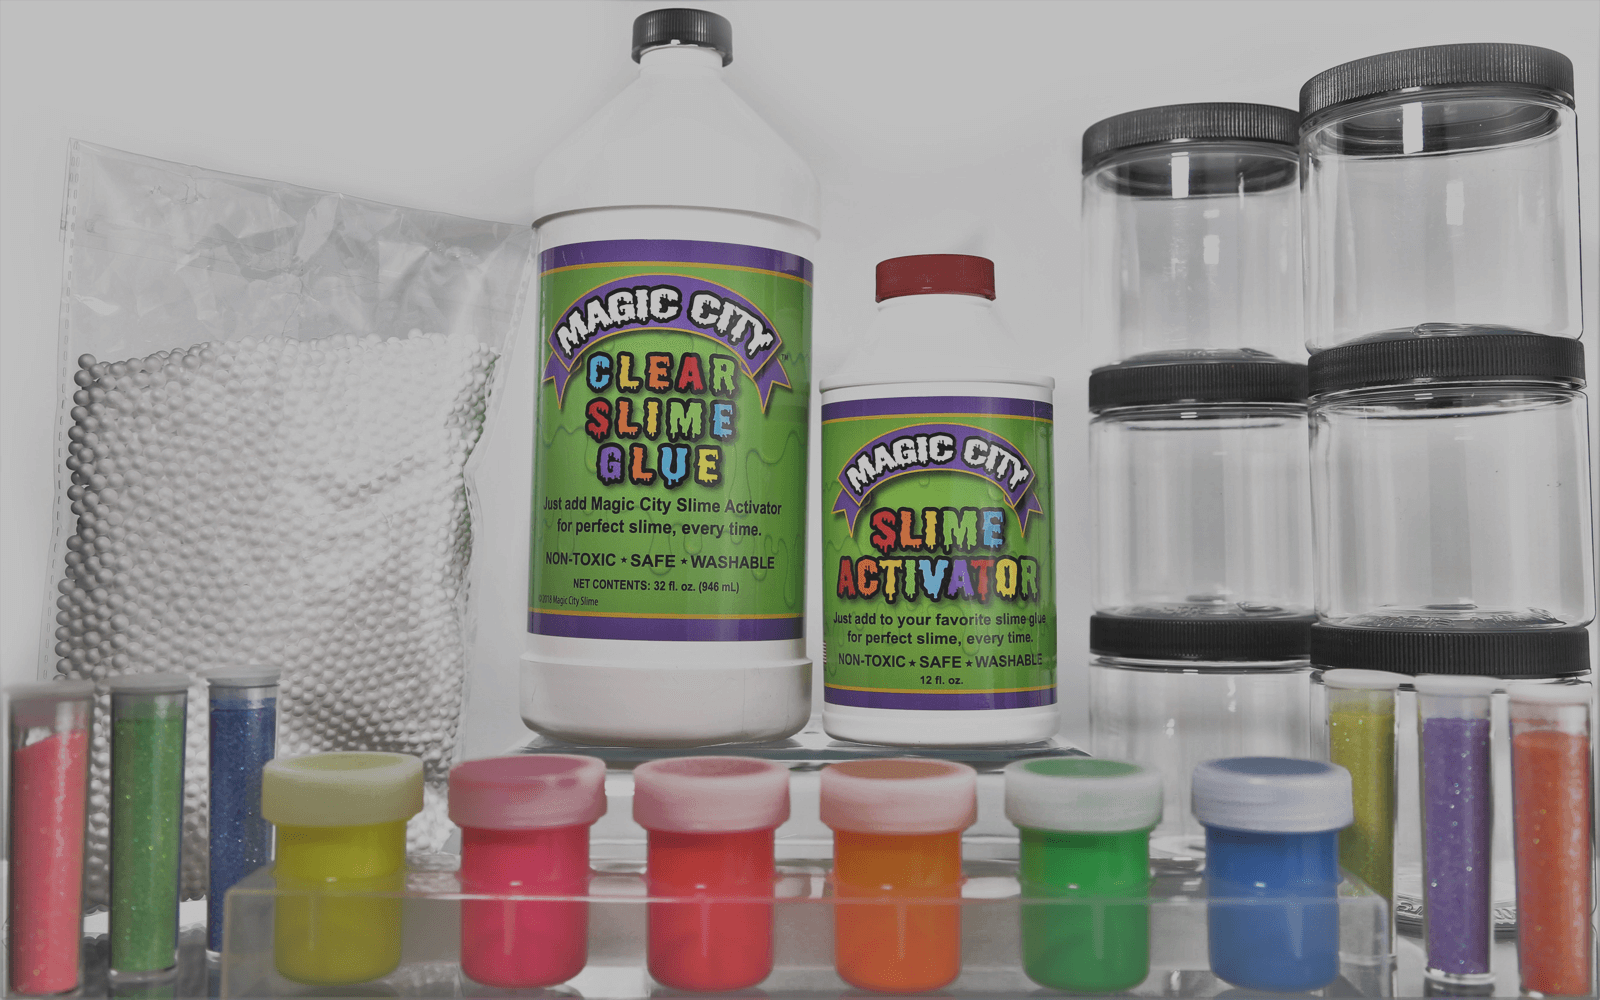 Magic City Slime Activator - Non Toxic, Just Add to Your Favorite Slime  Glue for Great Slime Every Time, Made in USA (1 Gallon)